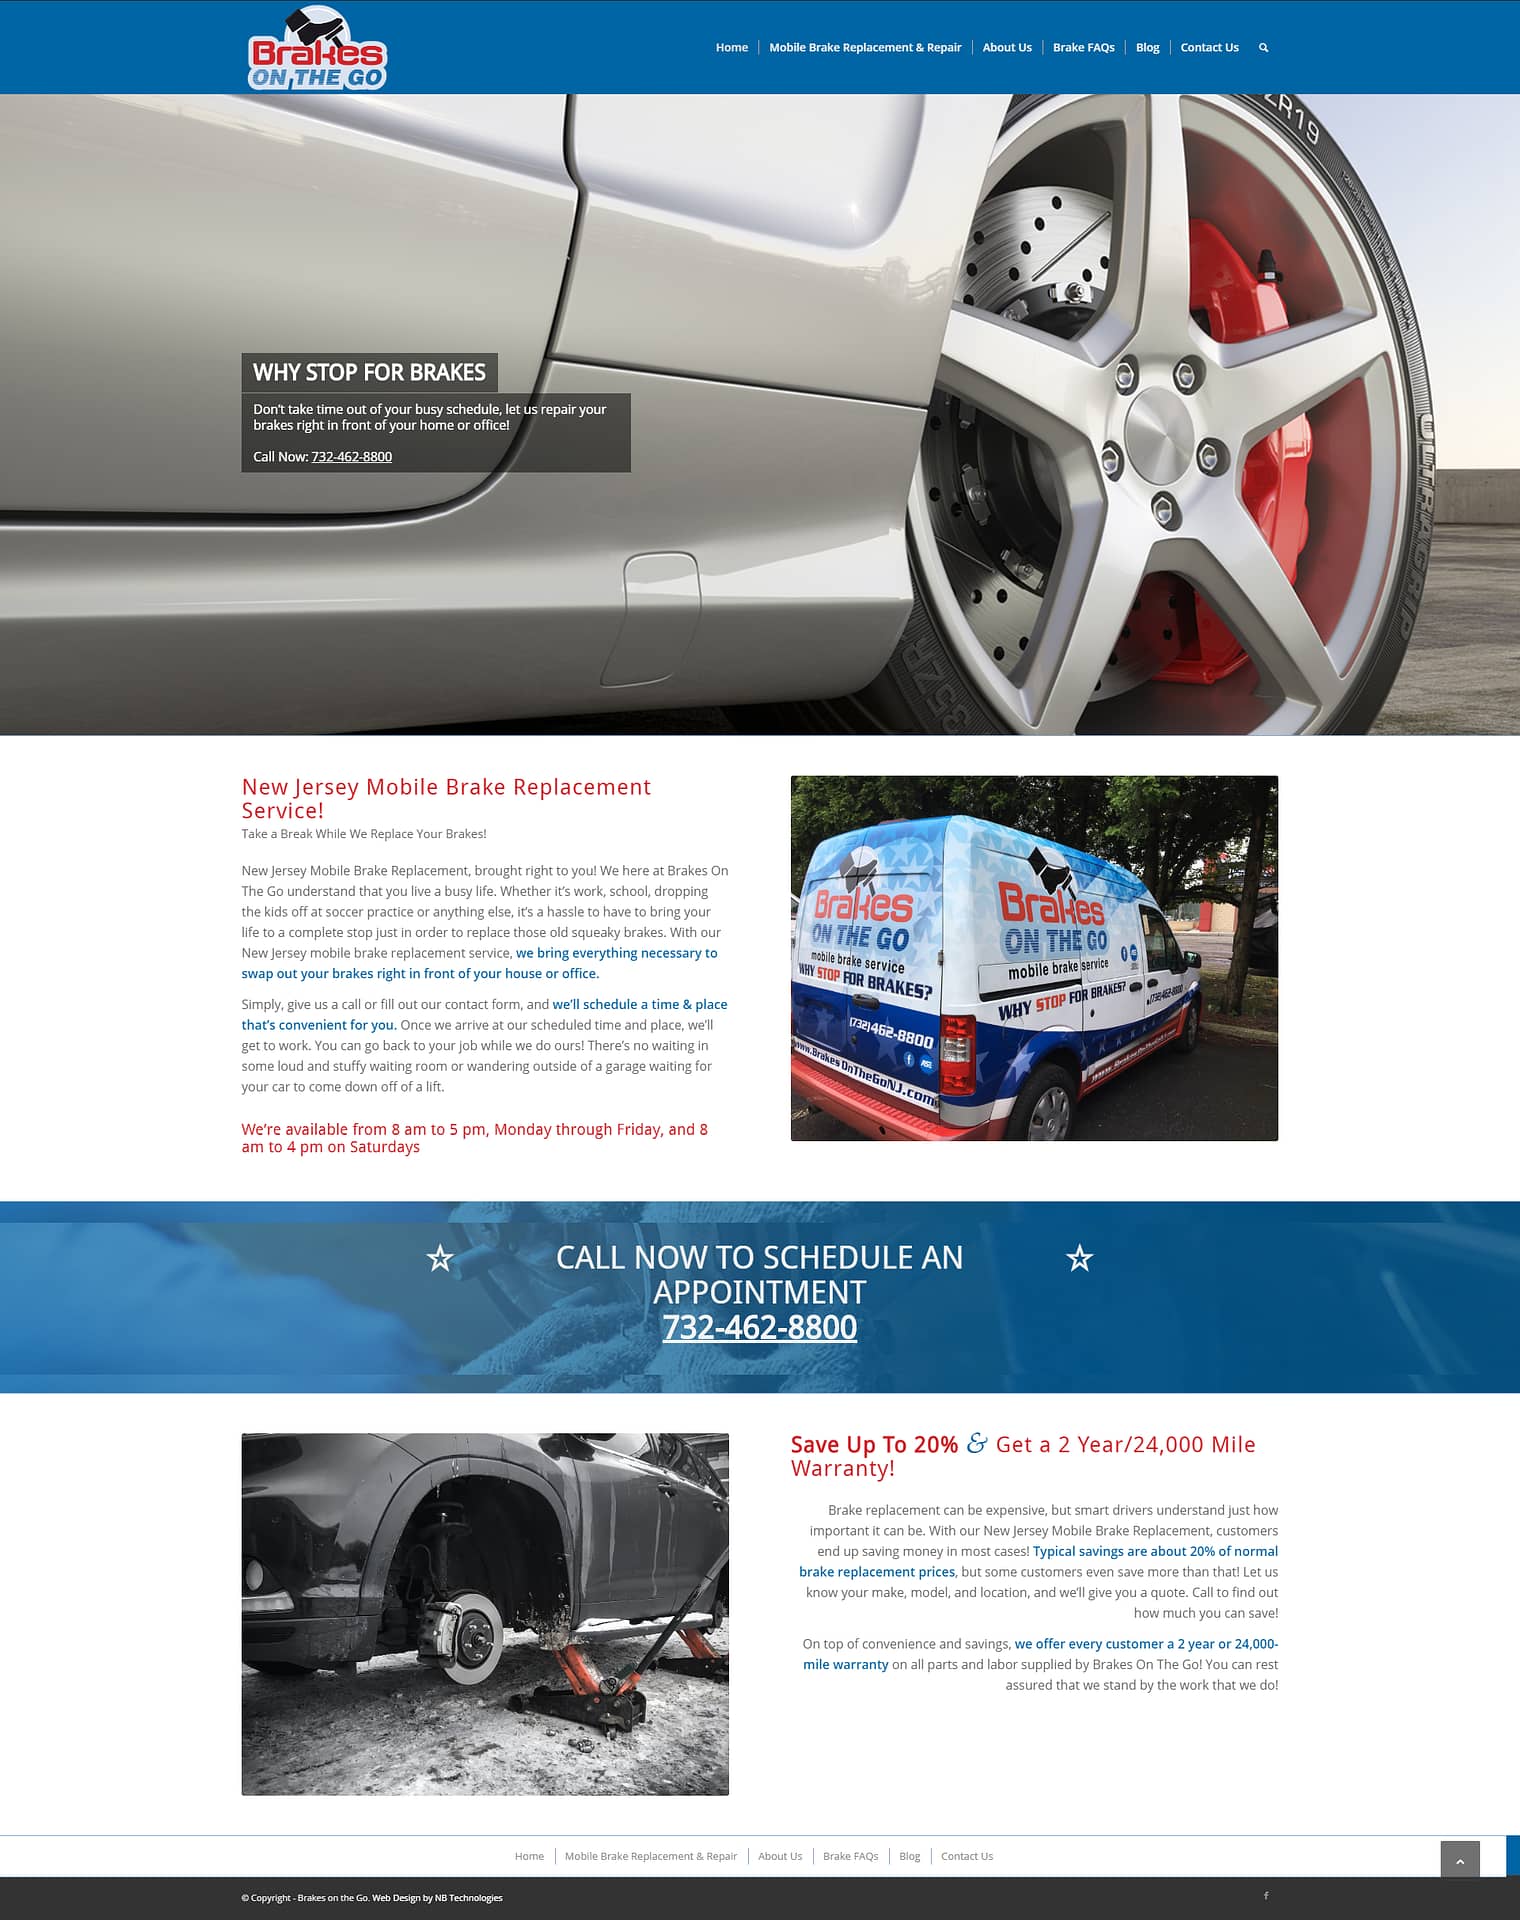 Brakes on the Go Website Homepage by NB Technologies